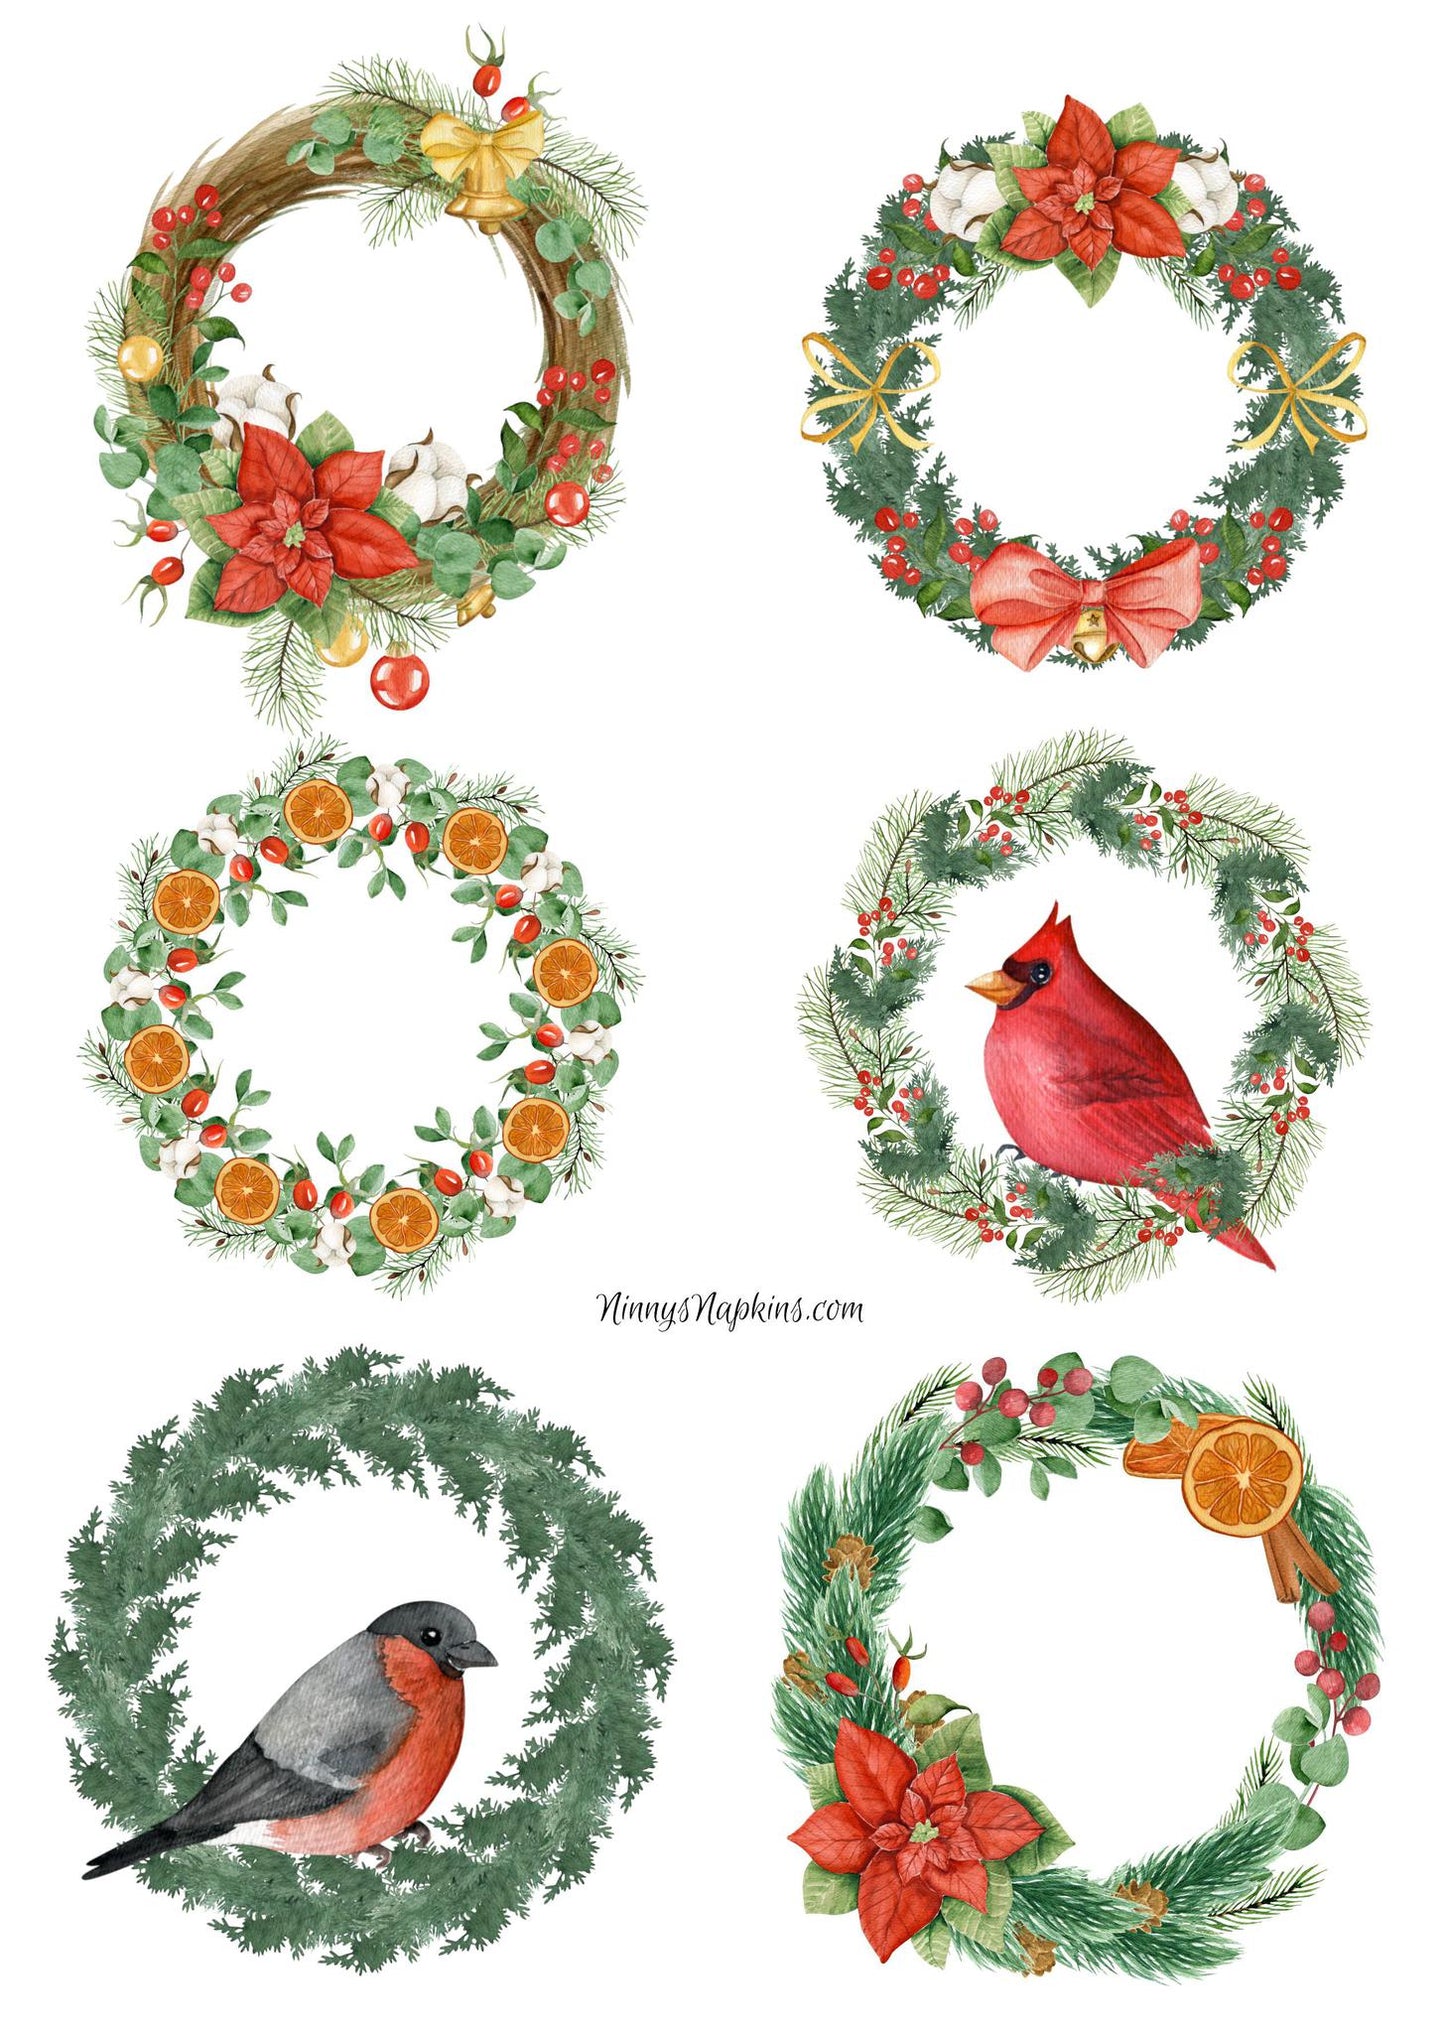 Ninny's Rice Paper A4 - Winter Wreaths